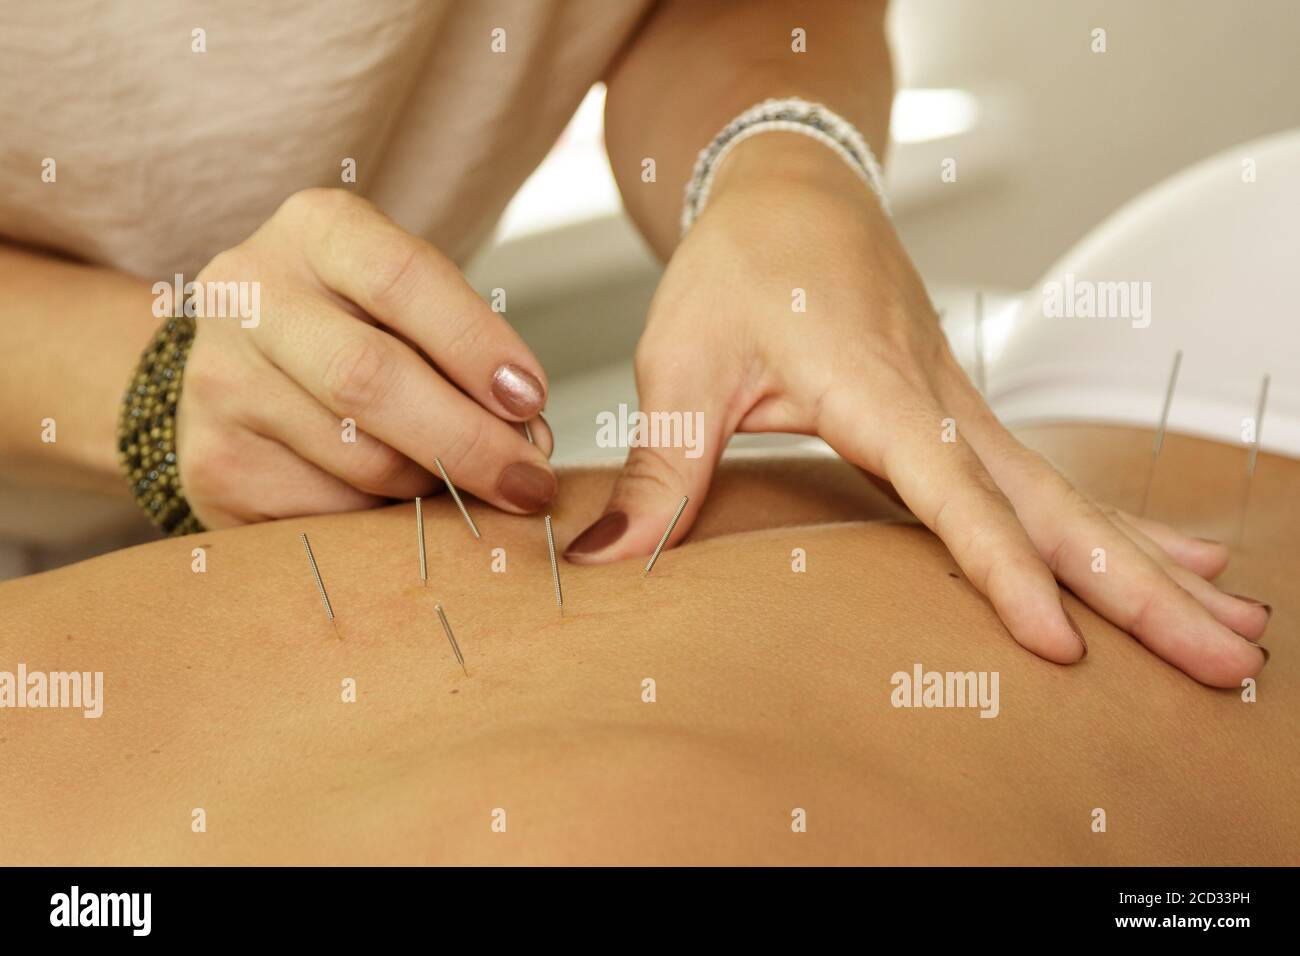 Alternative medicine. Master is injecting steel needles during procedure of acupuncture therapy. Stock Photo